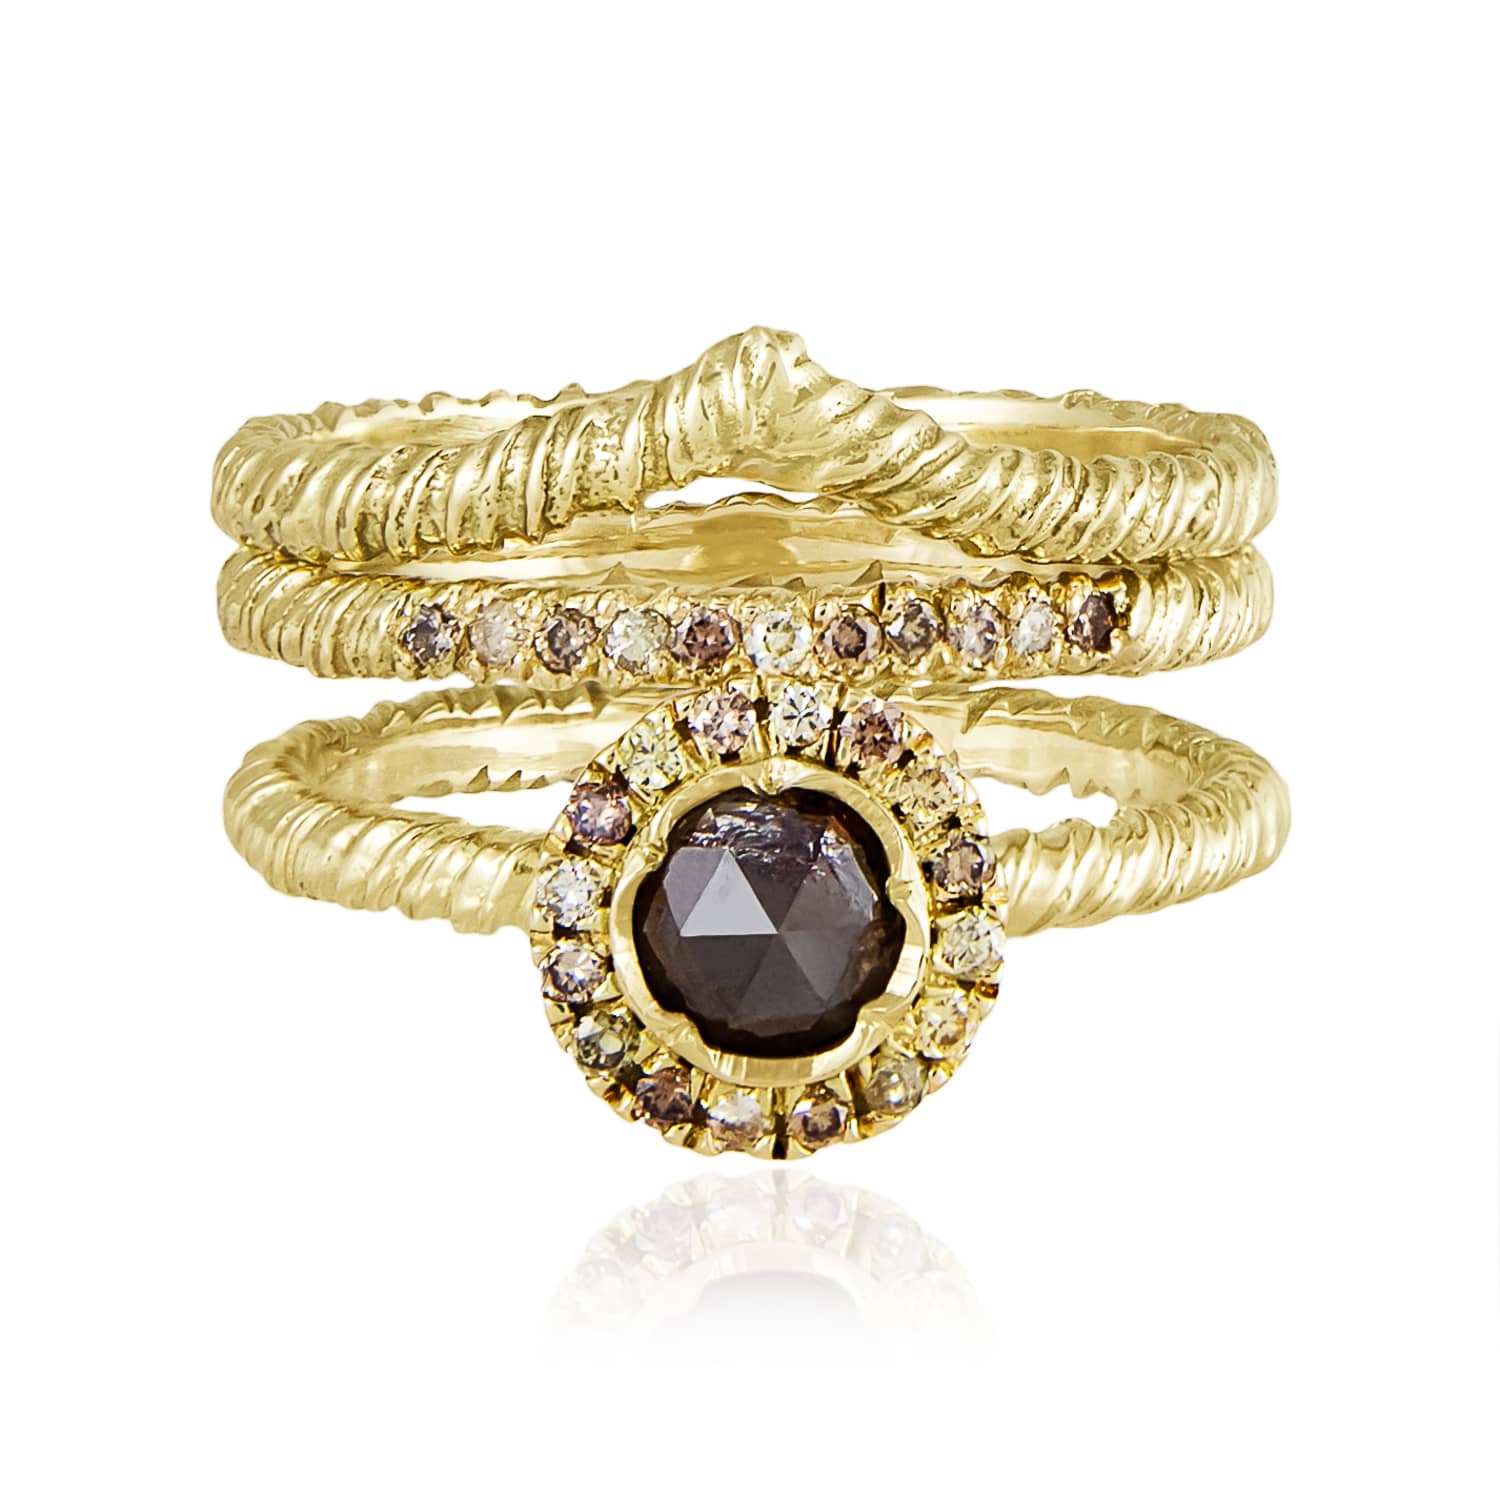 Natalie Perry Jewellery Ethical Engagement Ring Stack